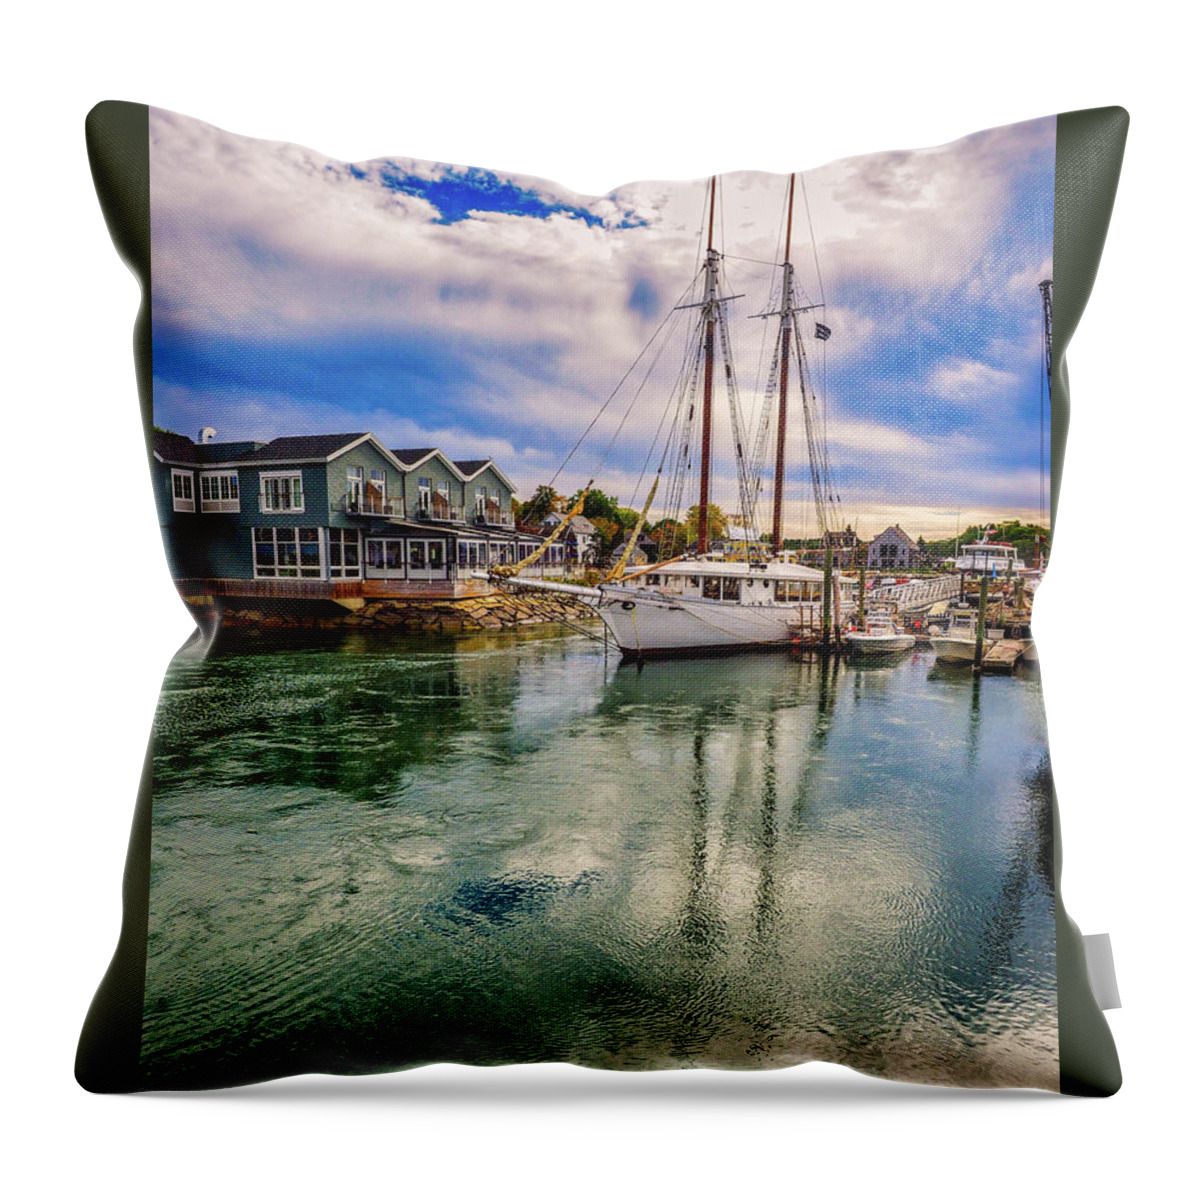 Kennebunkport Throw Pillow featuring the photograph Kennebunk River at Kennebunkport 203 by James C Richardson